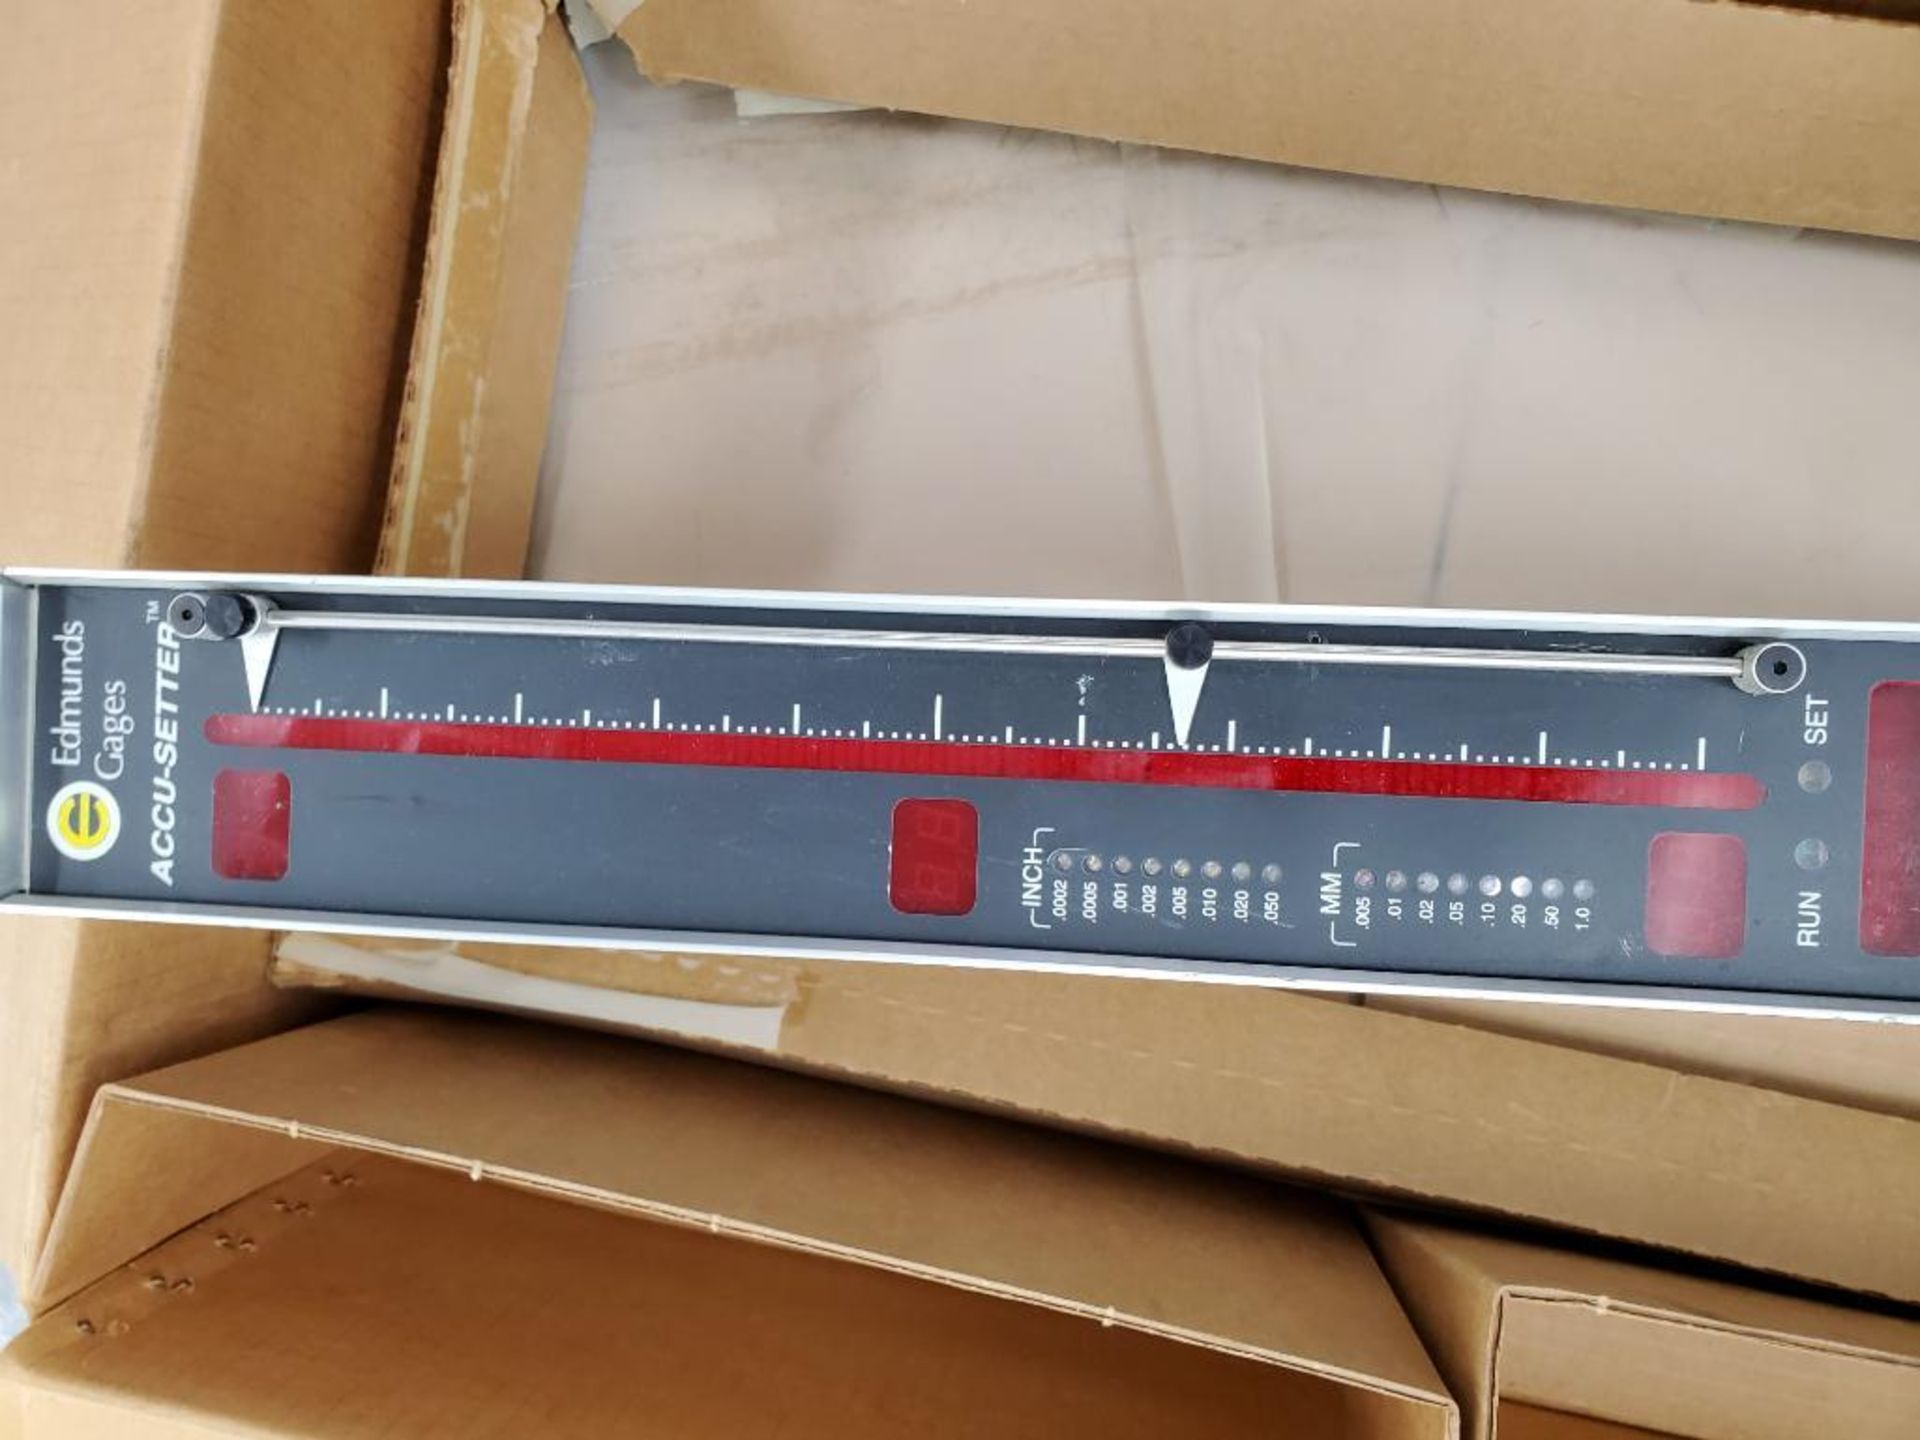 Edmunds Gage Accu-Setter E-9020 Digital Height Gage - Image 4 of 7